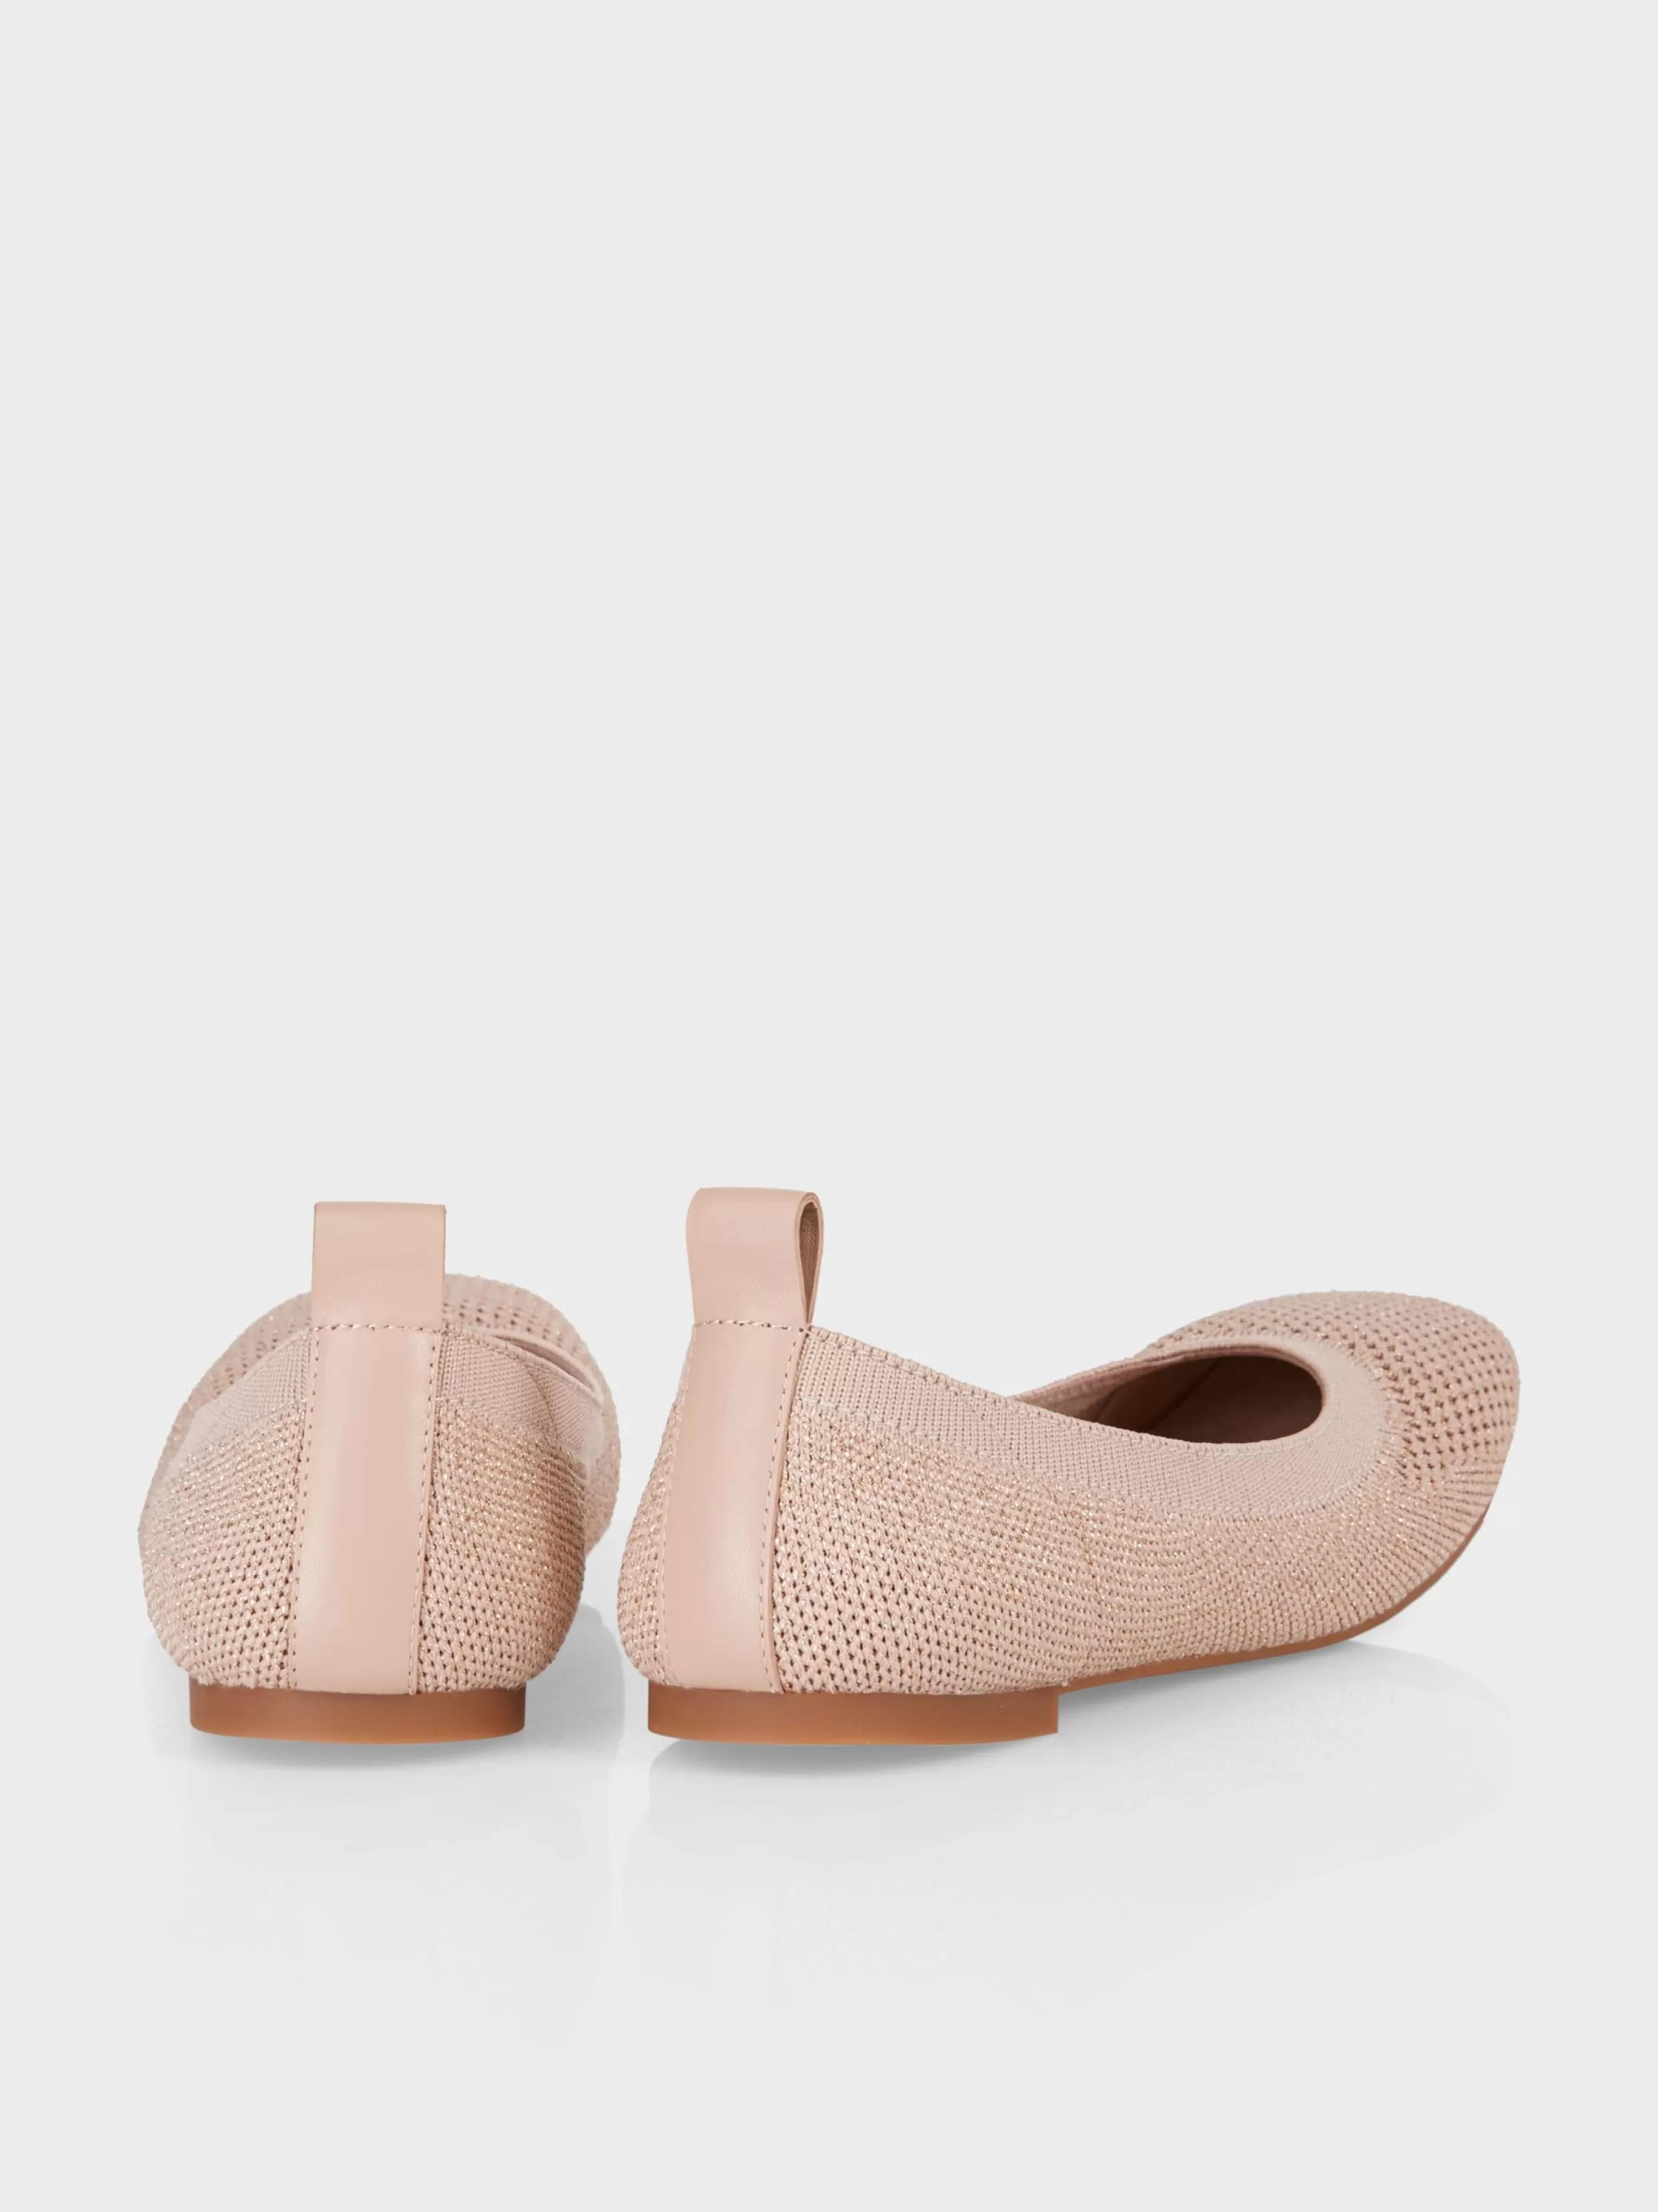 Marc Cain Ballerinas with jacquard knit | Shoes